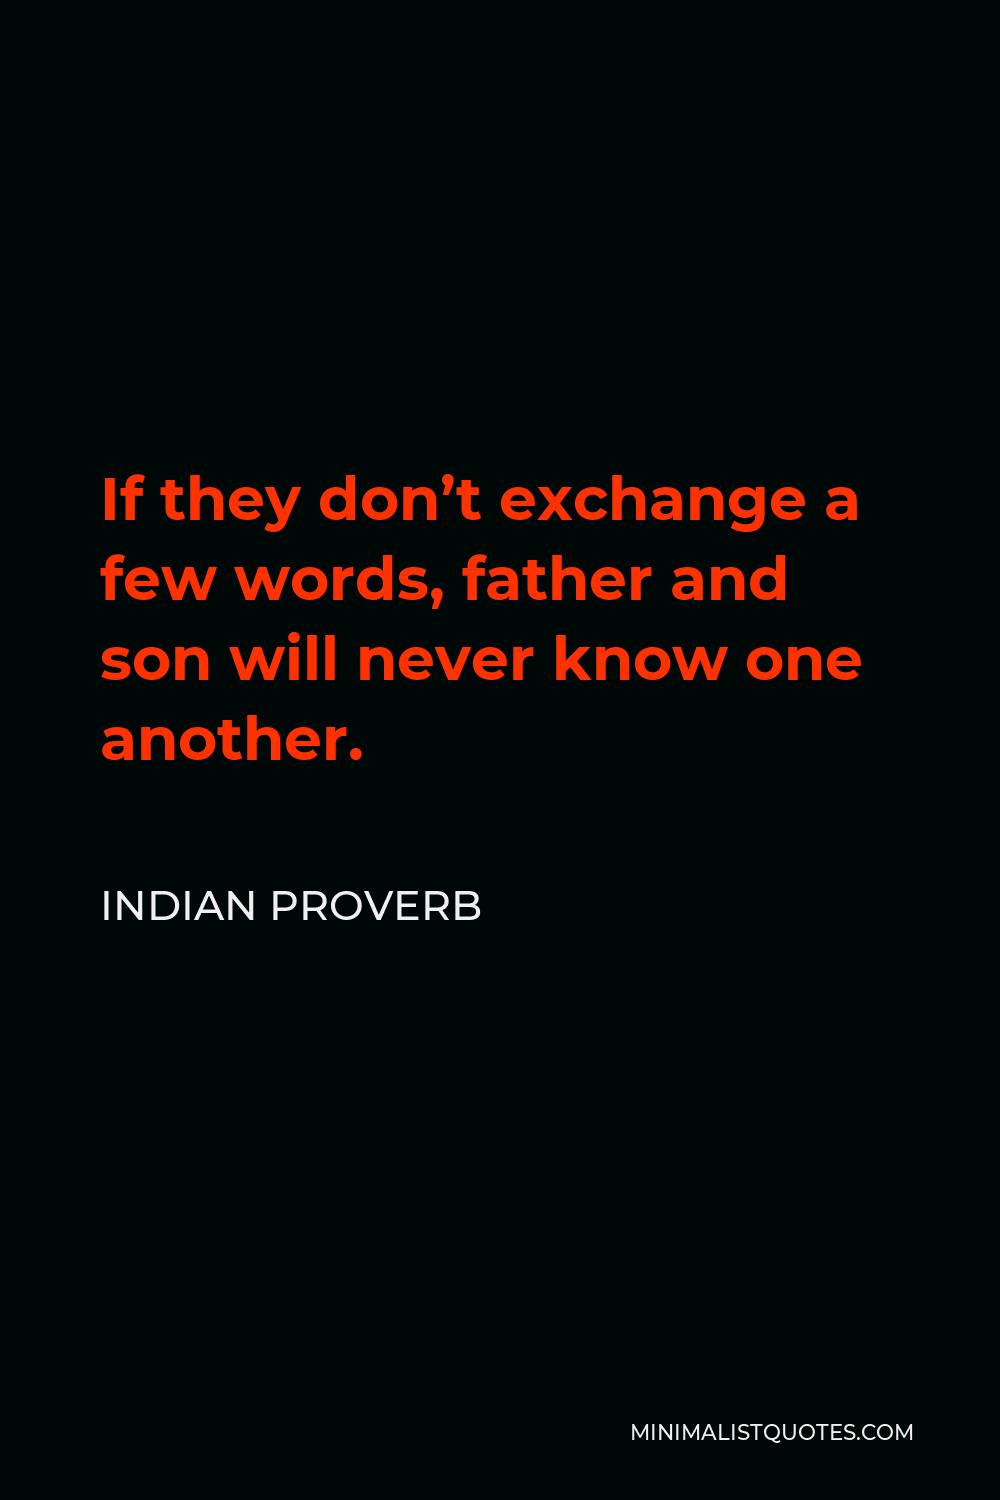 Indian Proverb Quote - If they don’t exchange a few words, father and son will never know one another.